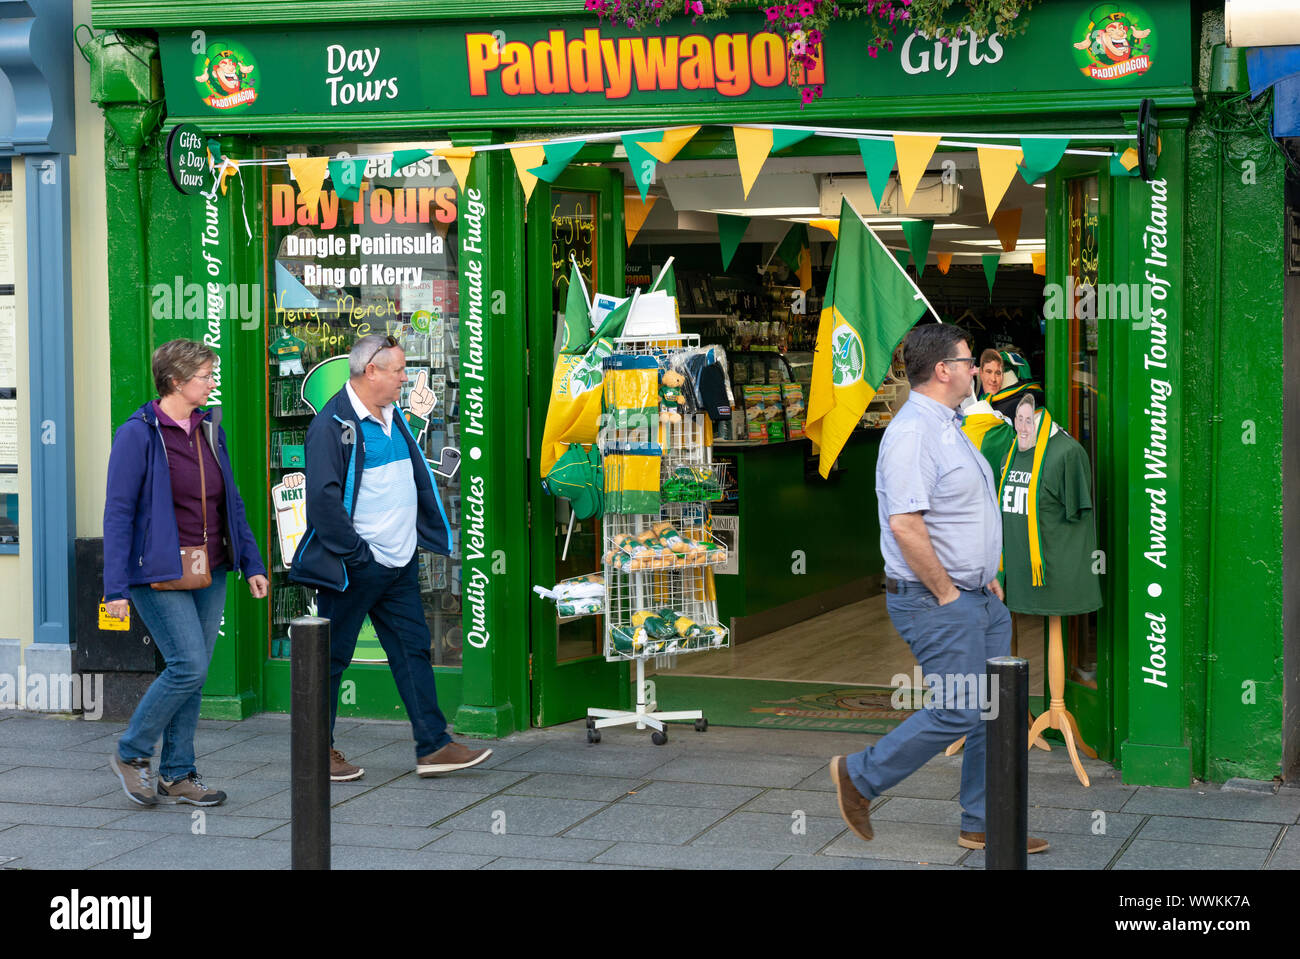 People walking past the Paddywagon day tours and gift gifts shop storefront on Main Street Killarney Ireland Stock Photo